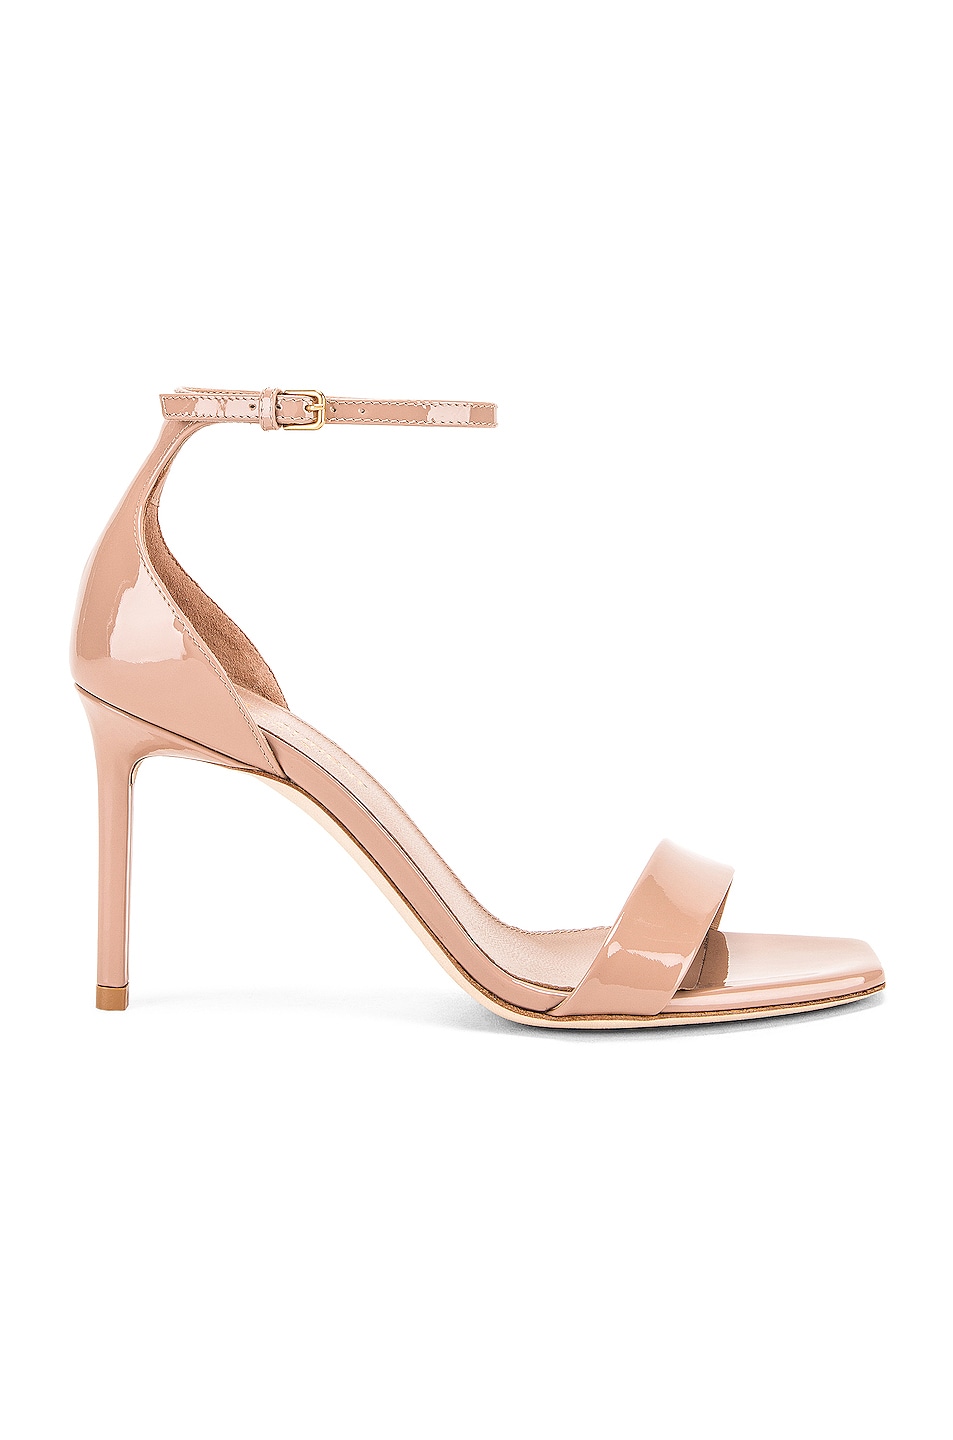 Image 1 of Saint Laurent Amber Ankle Strap Sandals in Nude Rose